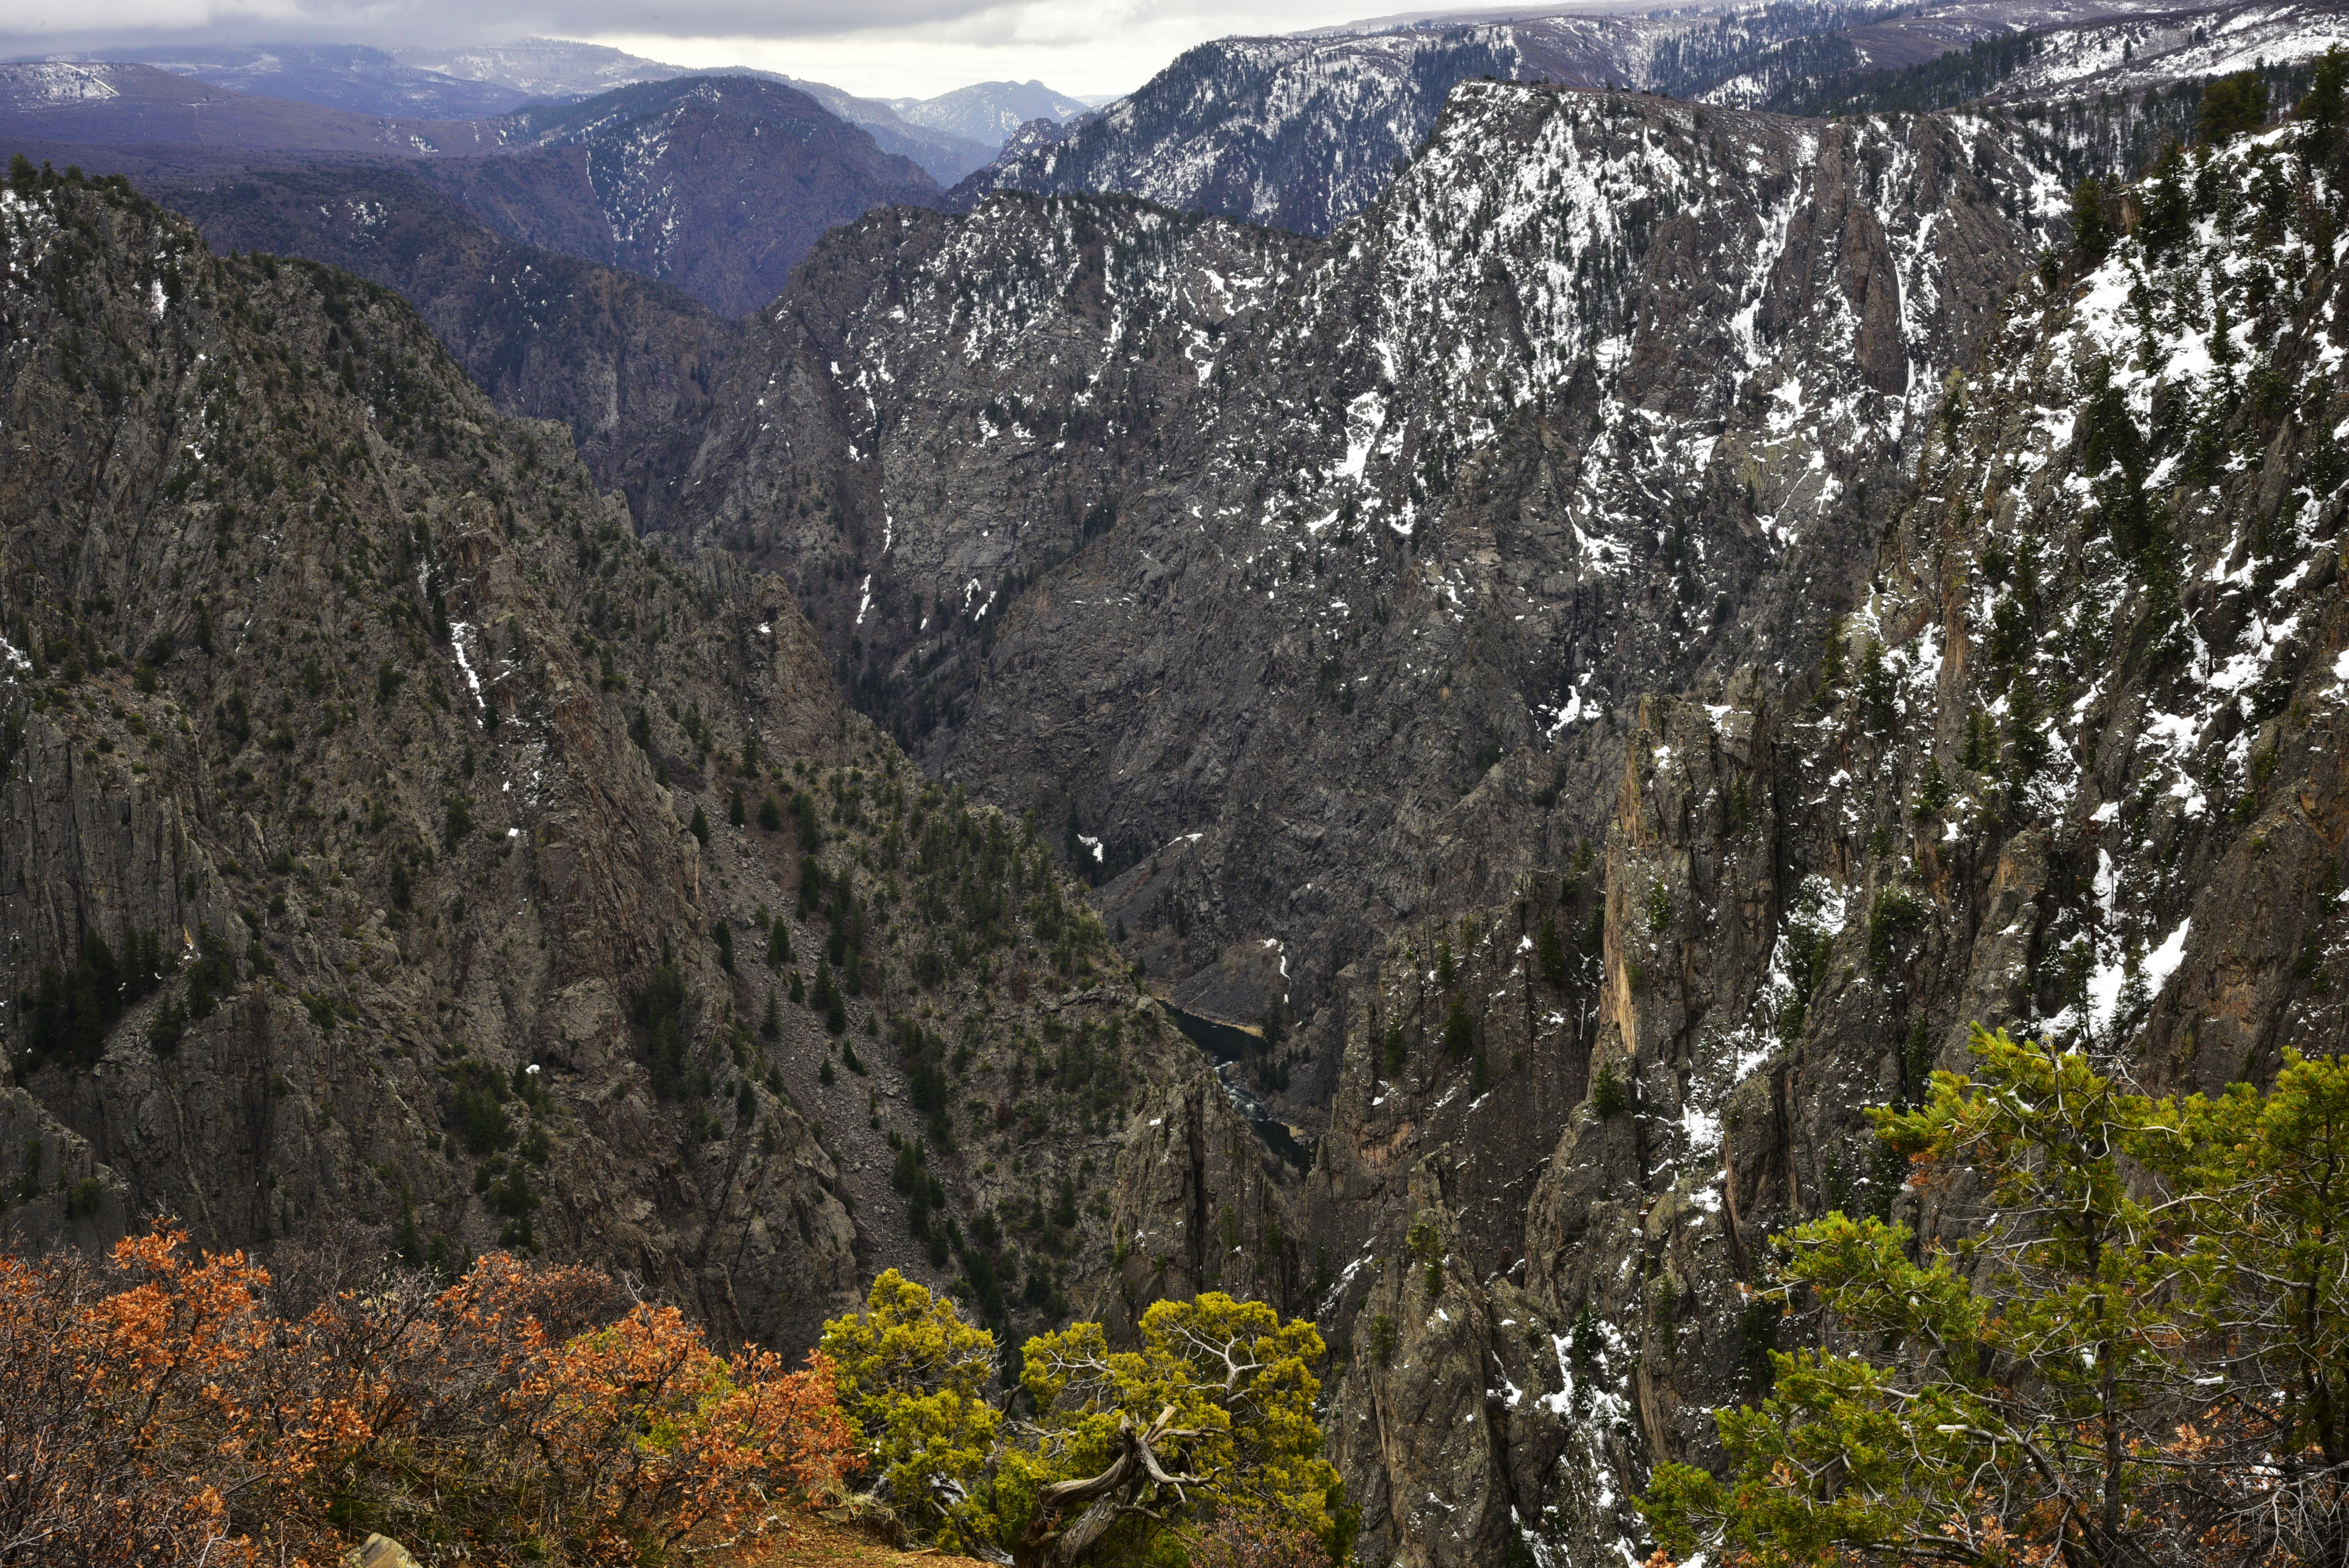 View from Tomichi Point  -  Black Canyon of the Gunnison National Park, Colorado 